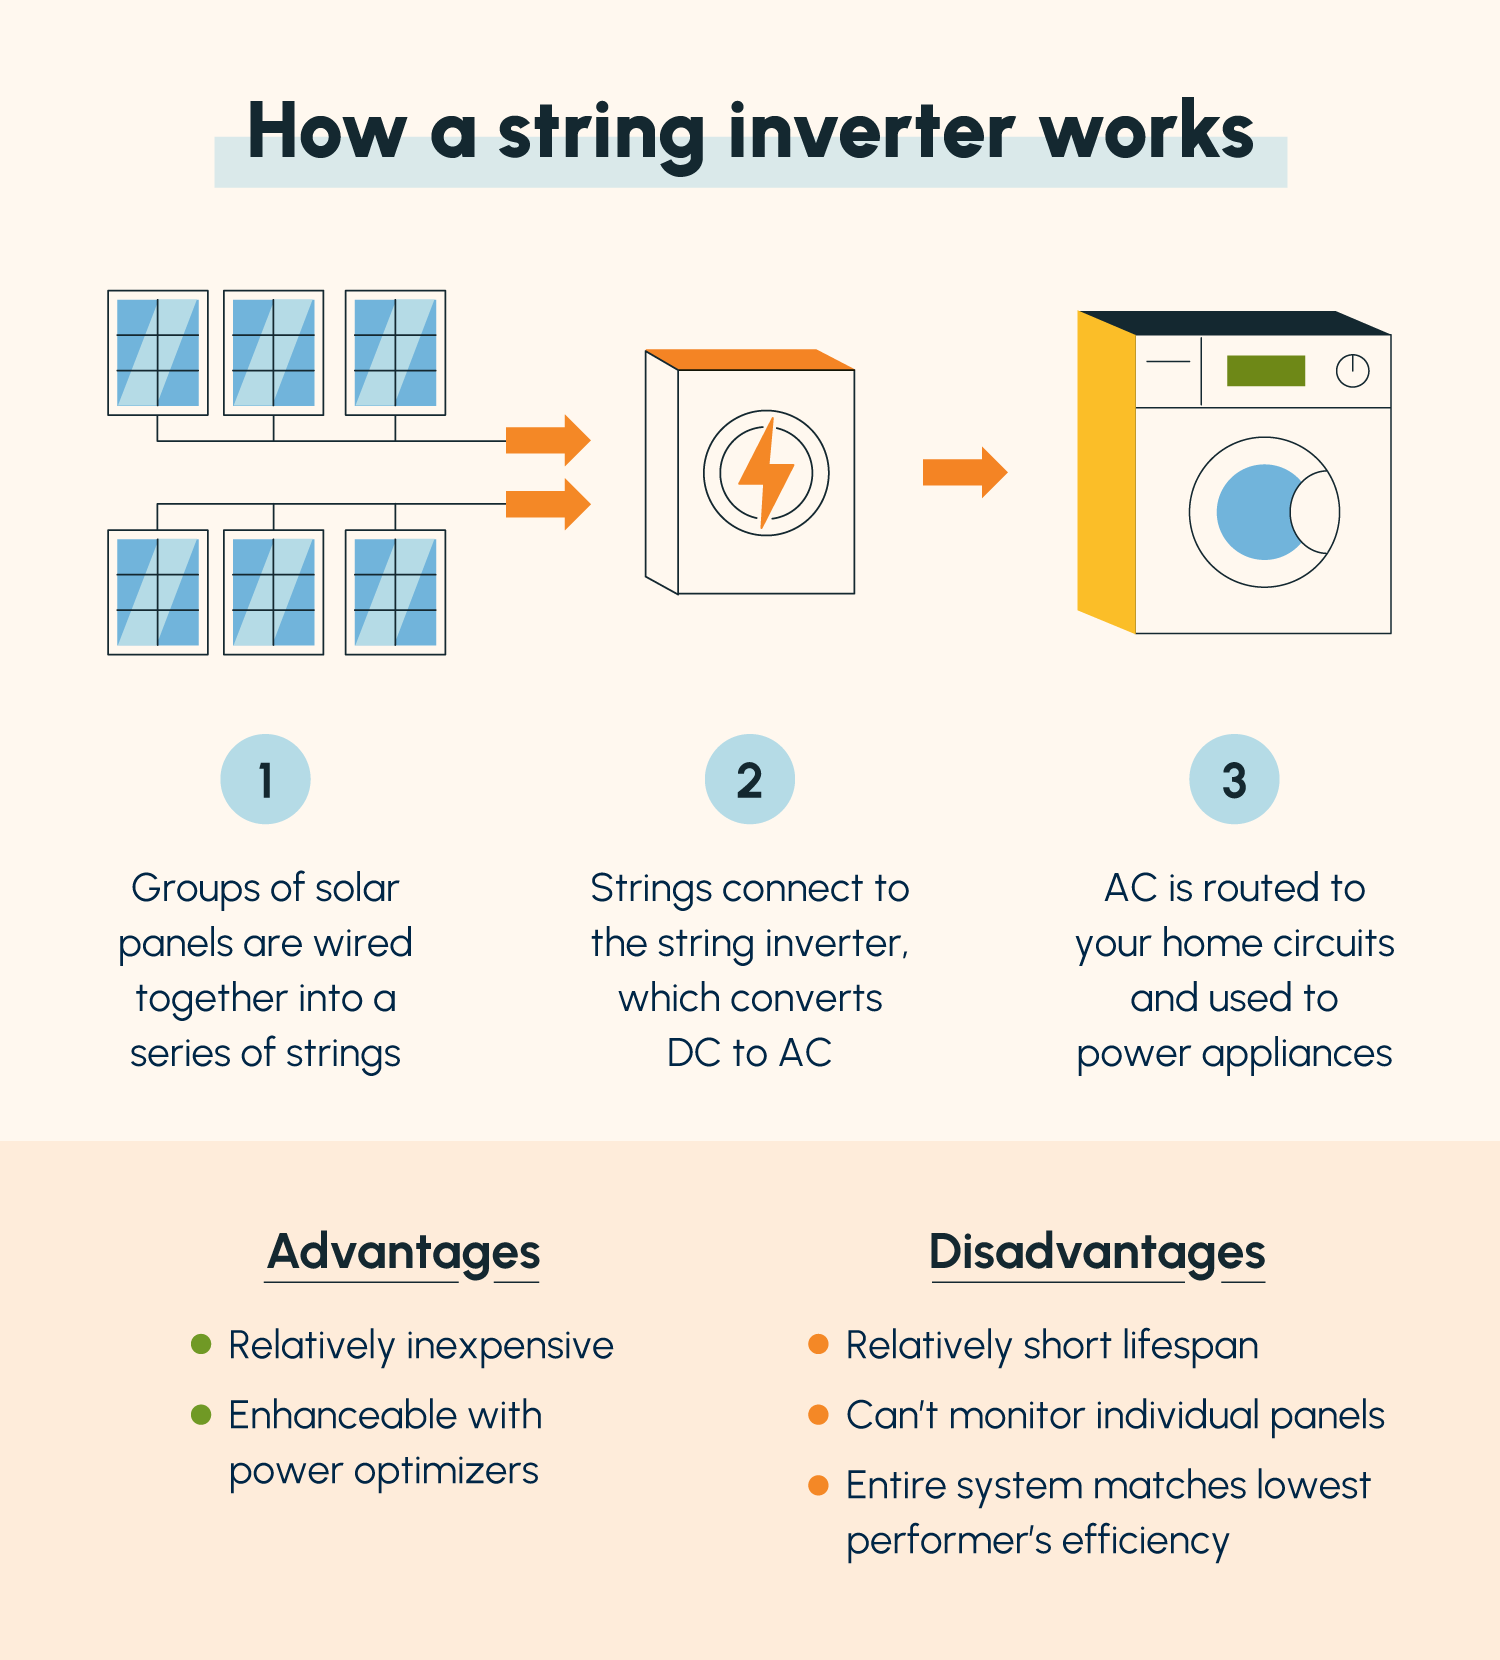 An illustration of how a string inverter works followed by a list of advantages and disadvantages of string inverters